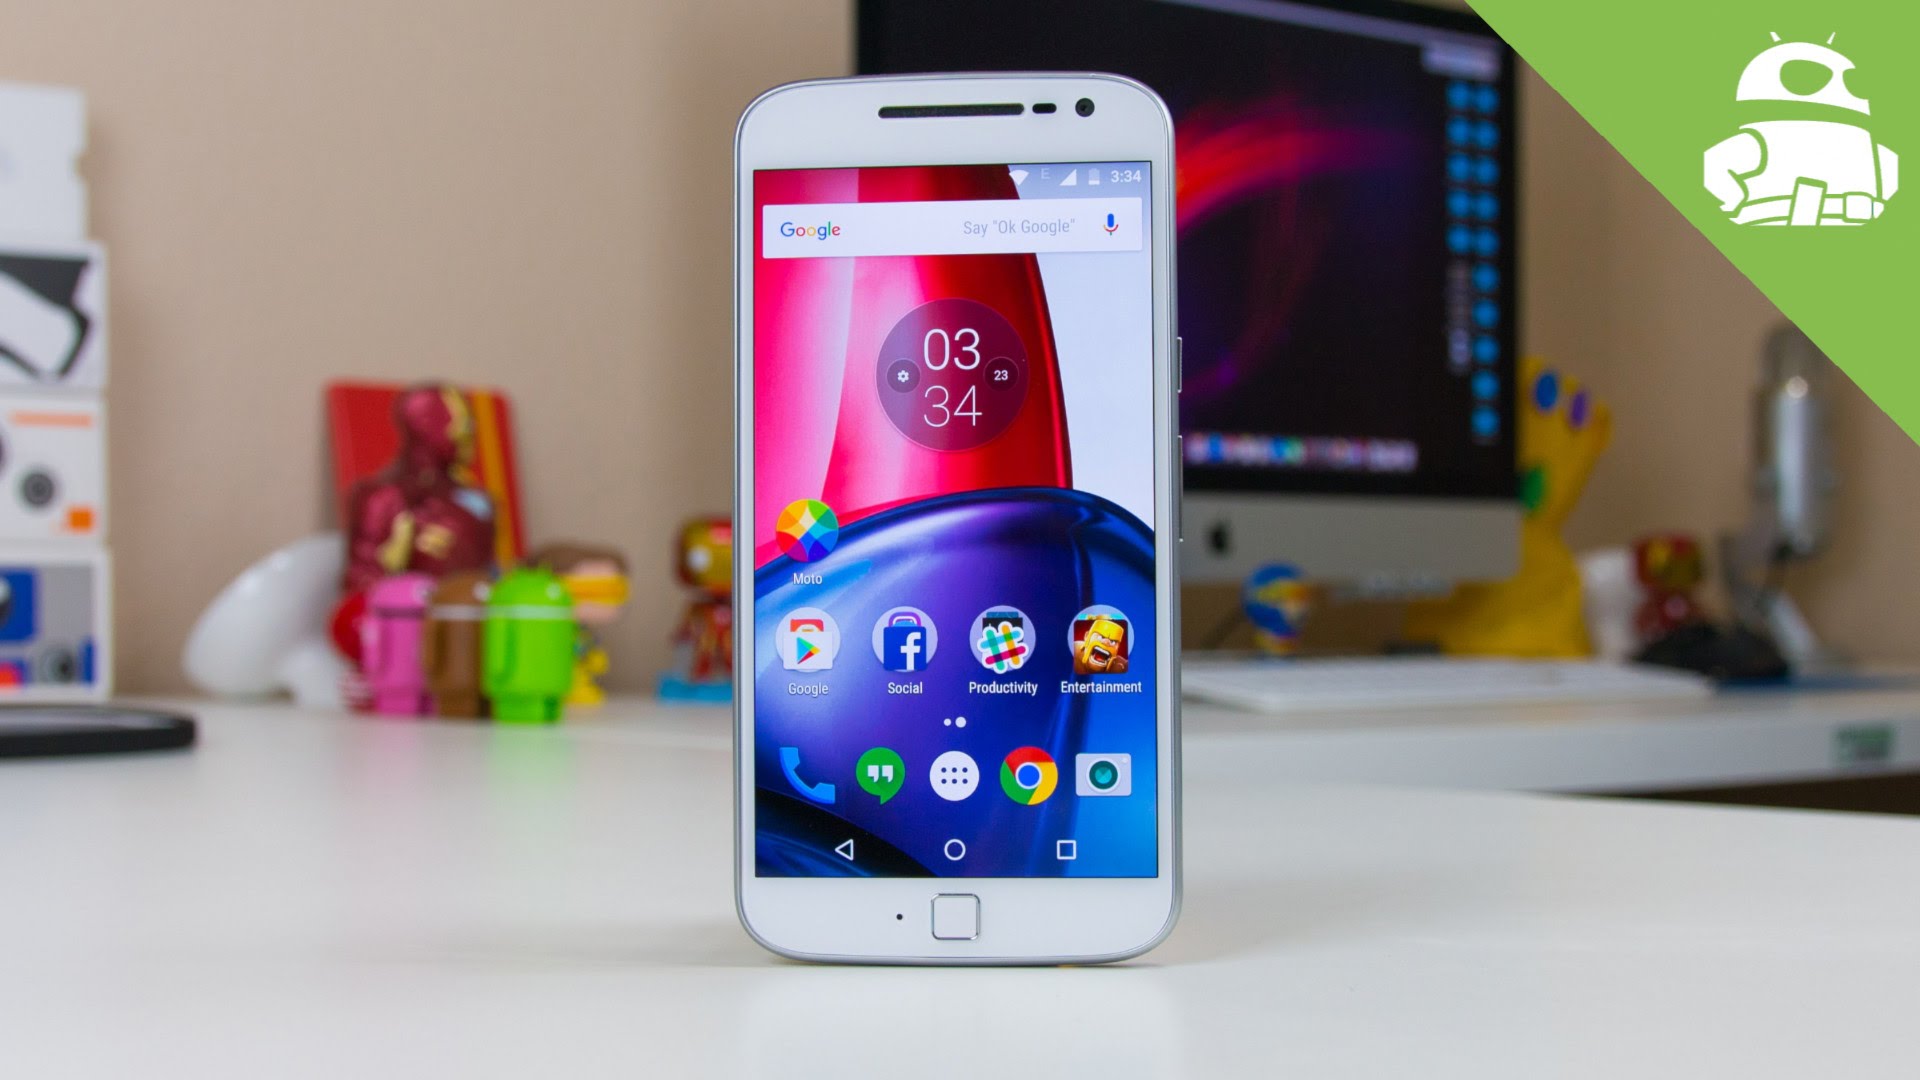 Free Moto G4 Plus contest giveaway